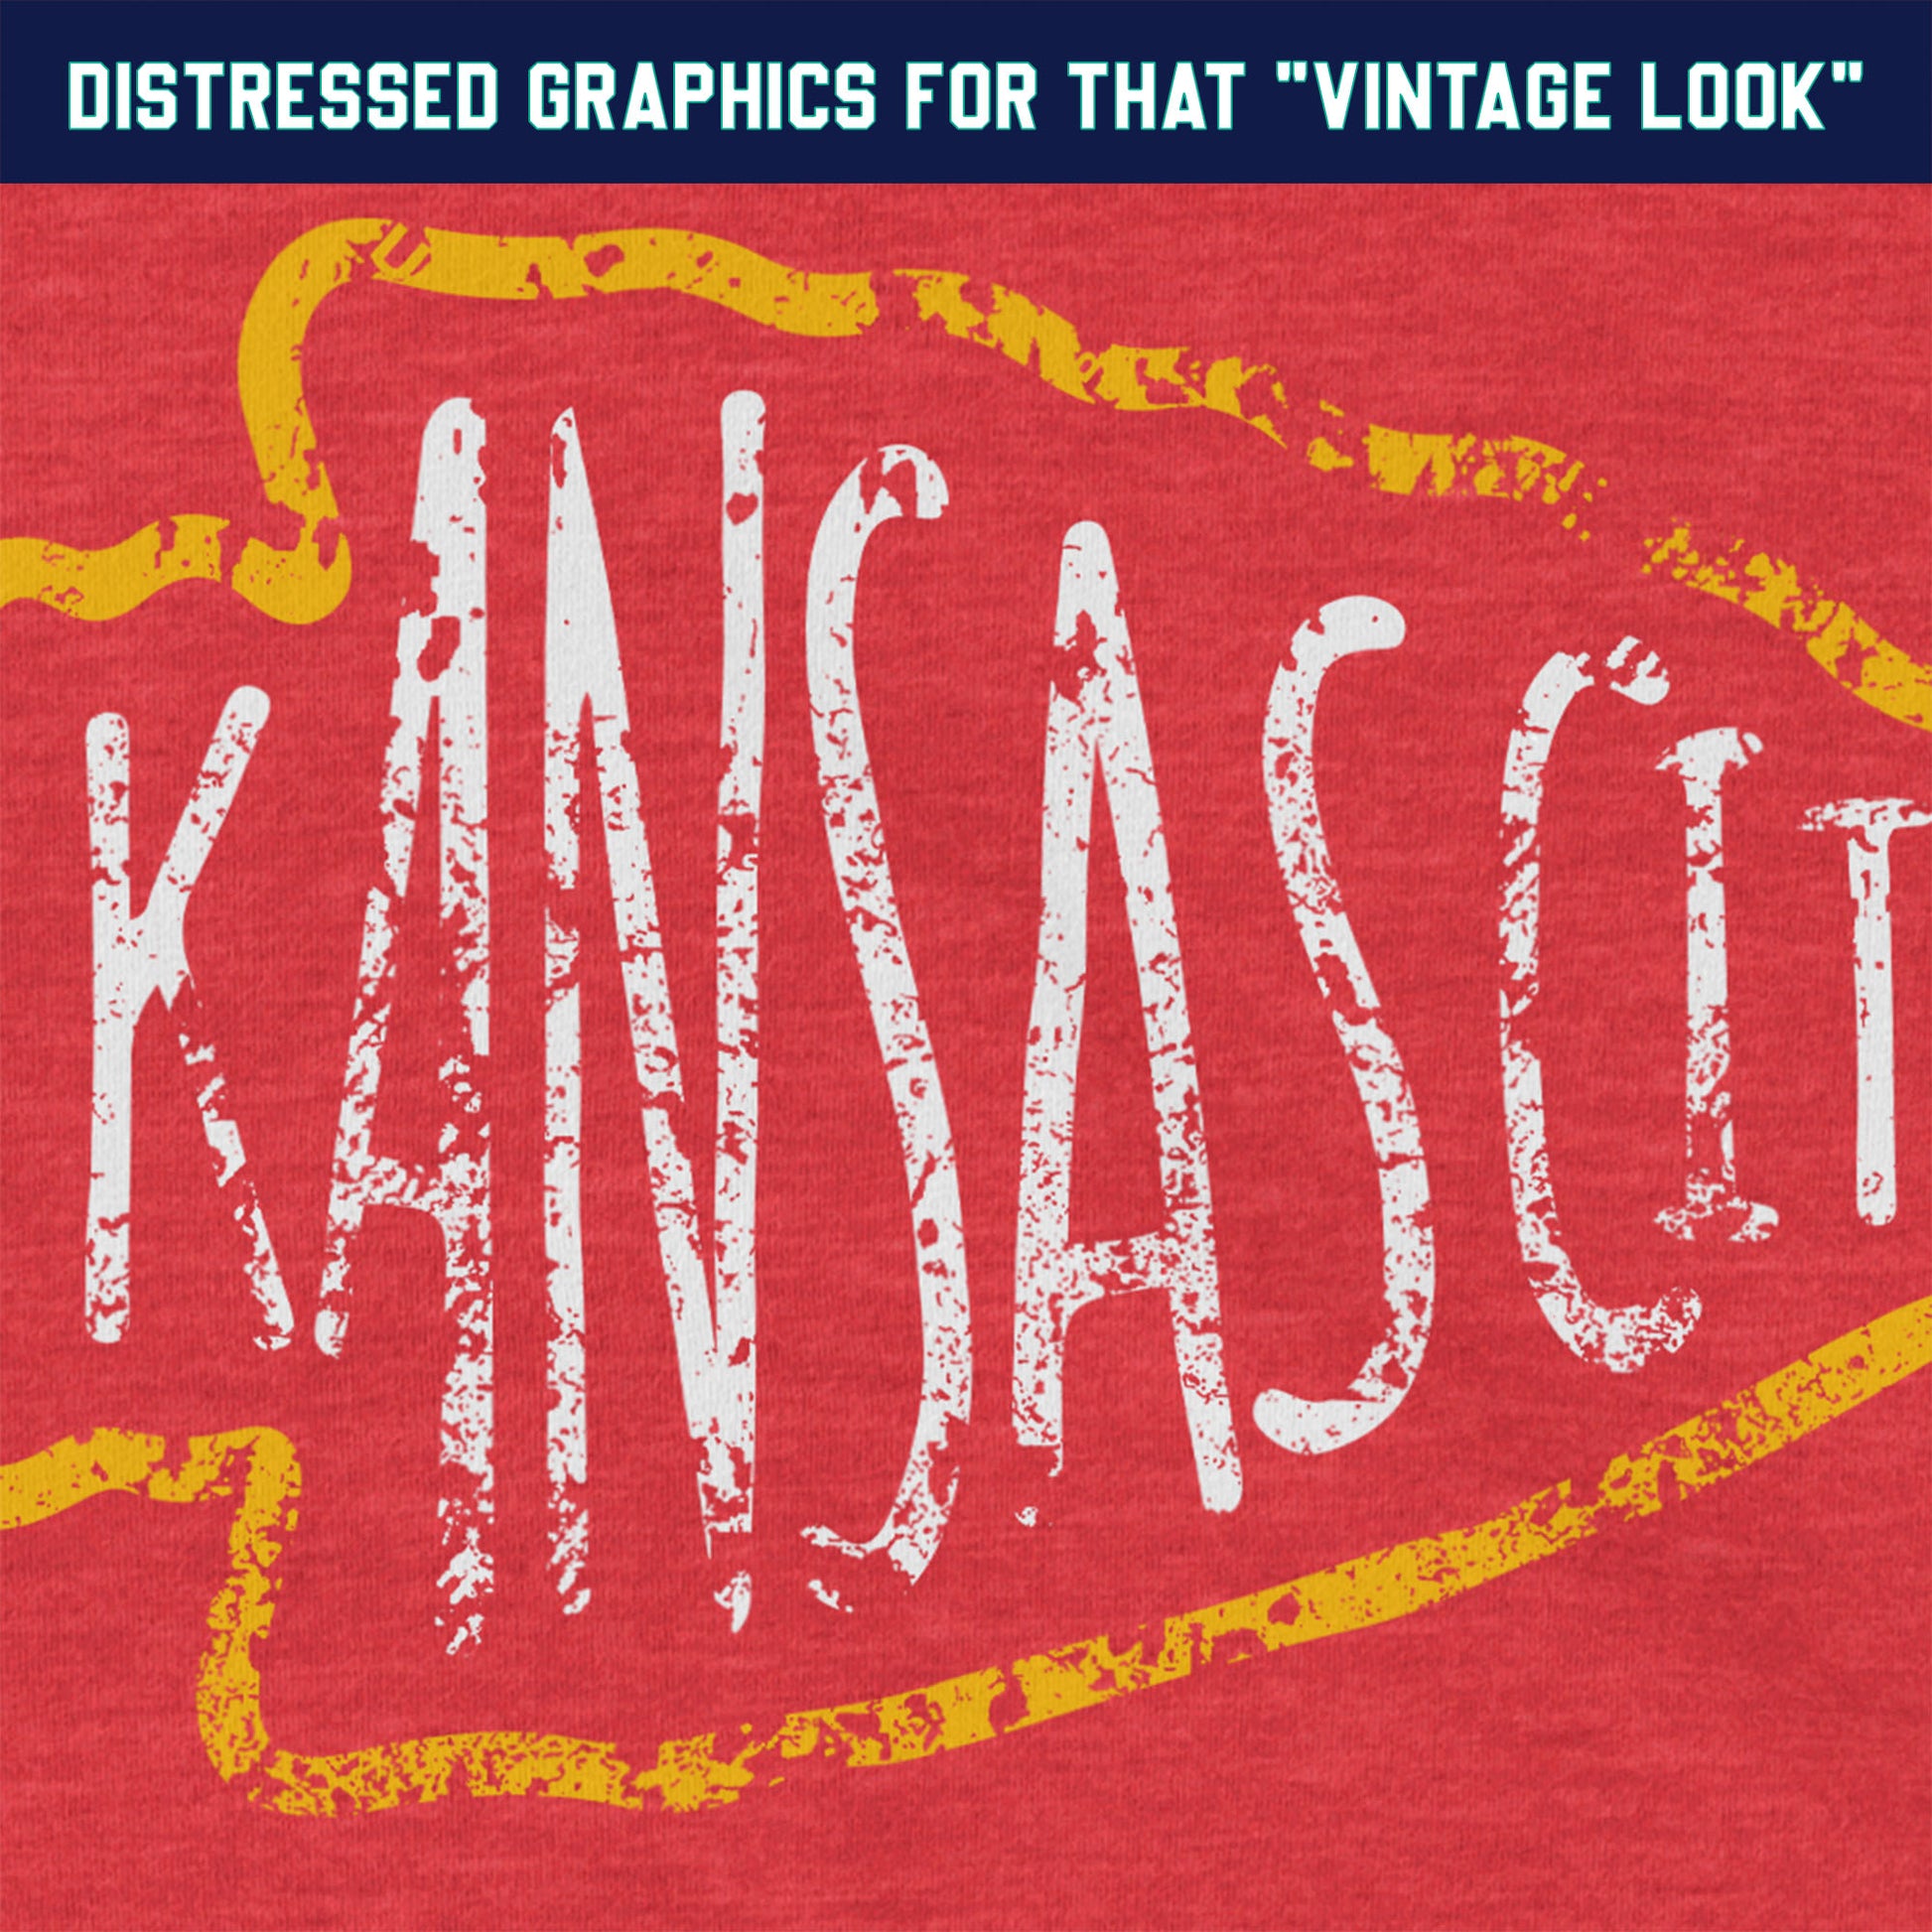 KC Swag Kansas City Chiefs white KANSA CITY inside yellow arrowhead outline on heather red t-shirt closeup details of distressed graphics